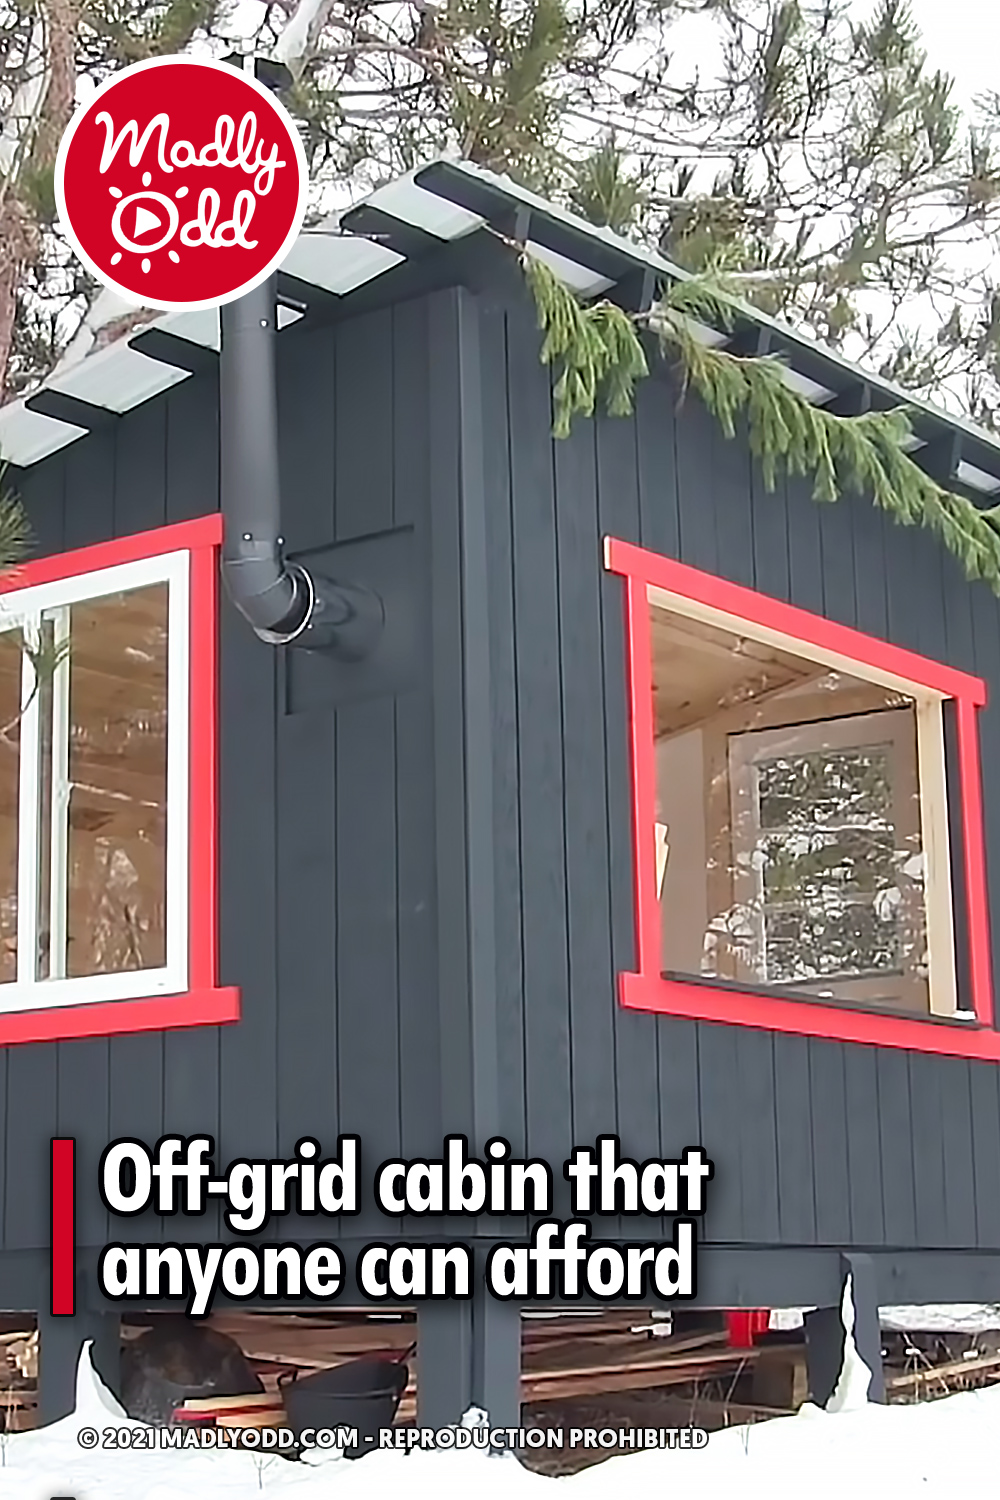 Off-grid cabin that anyone can afford